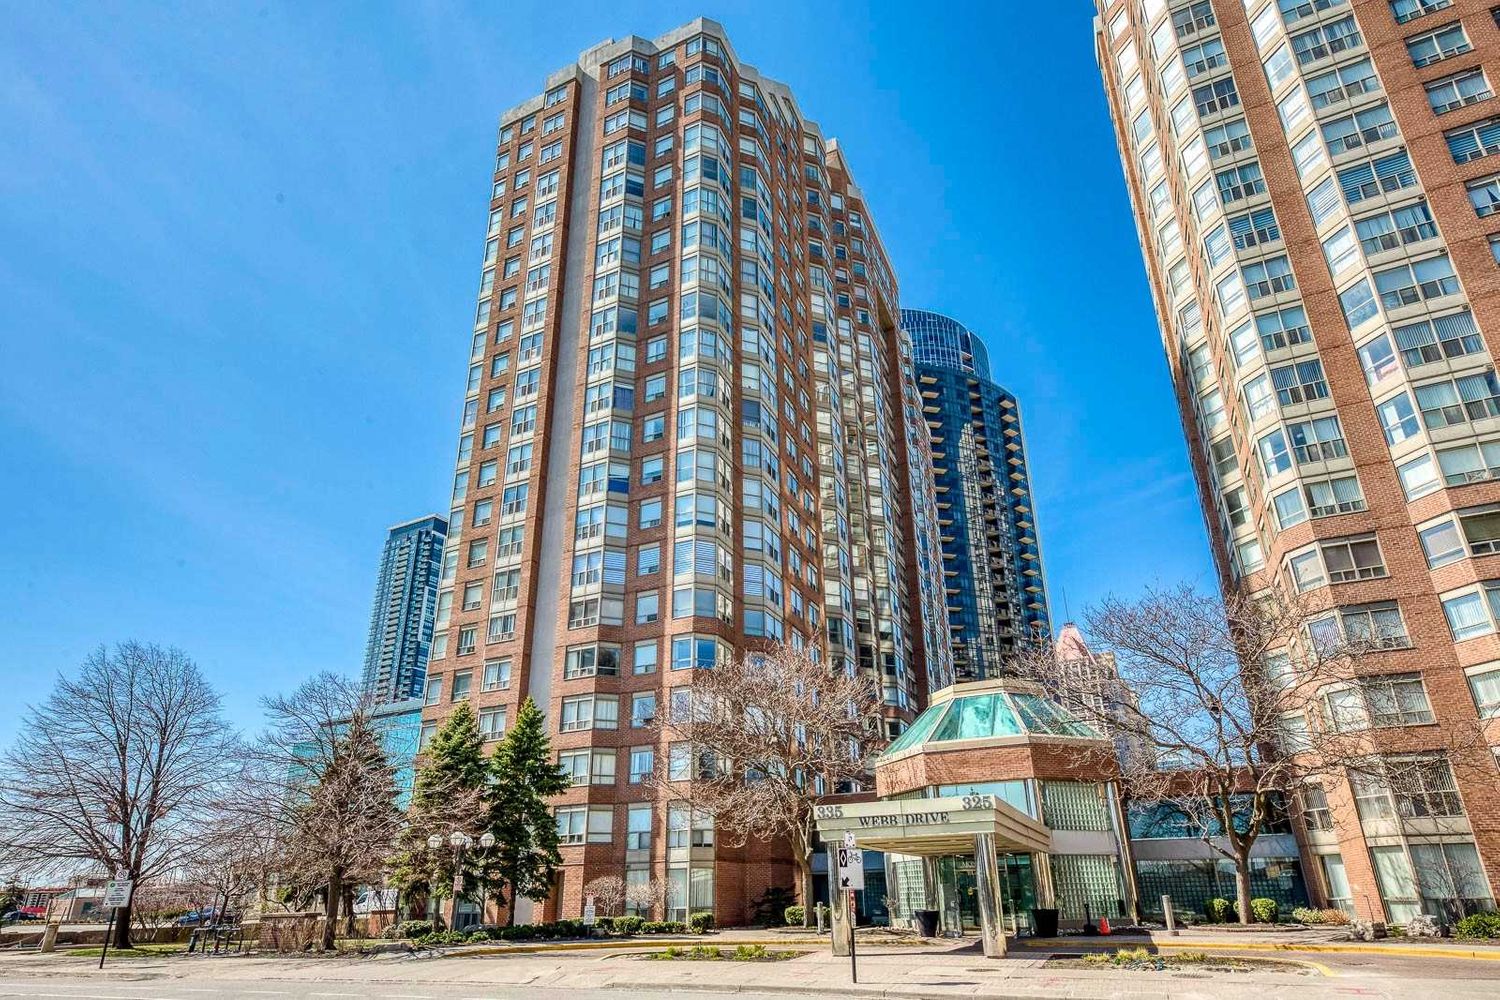 335 Webb Drive. Monarchy Condos is located in  Mississauga, Toronto - image #1 of 2